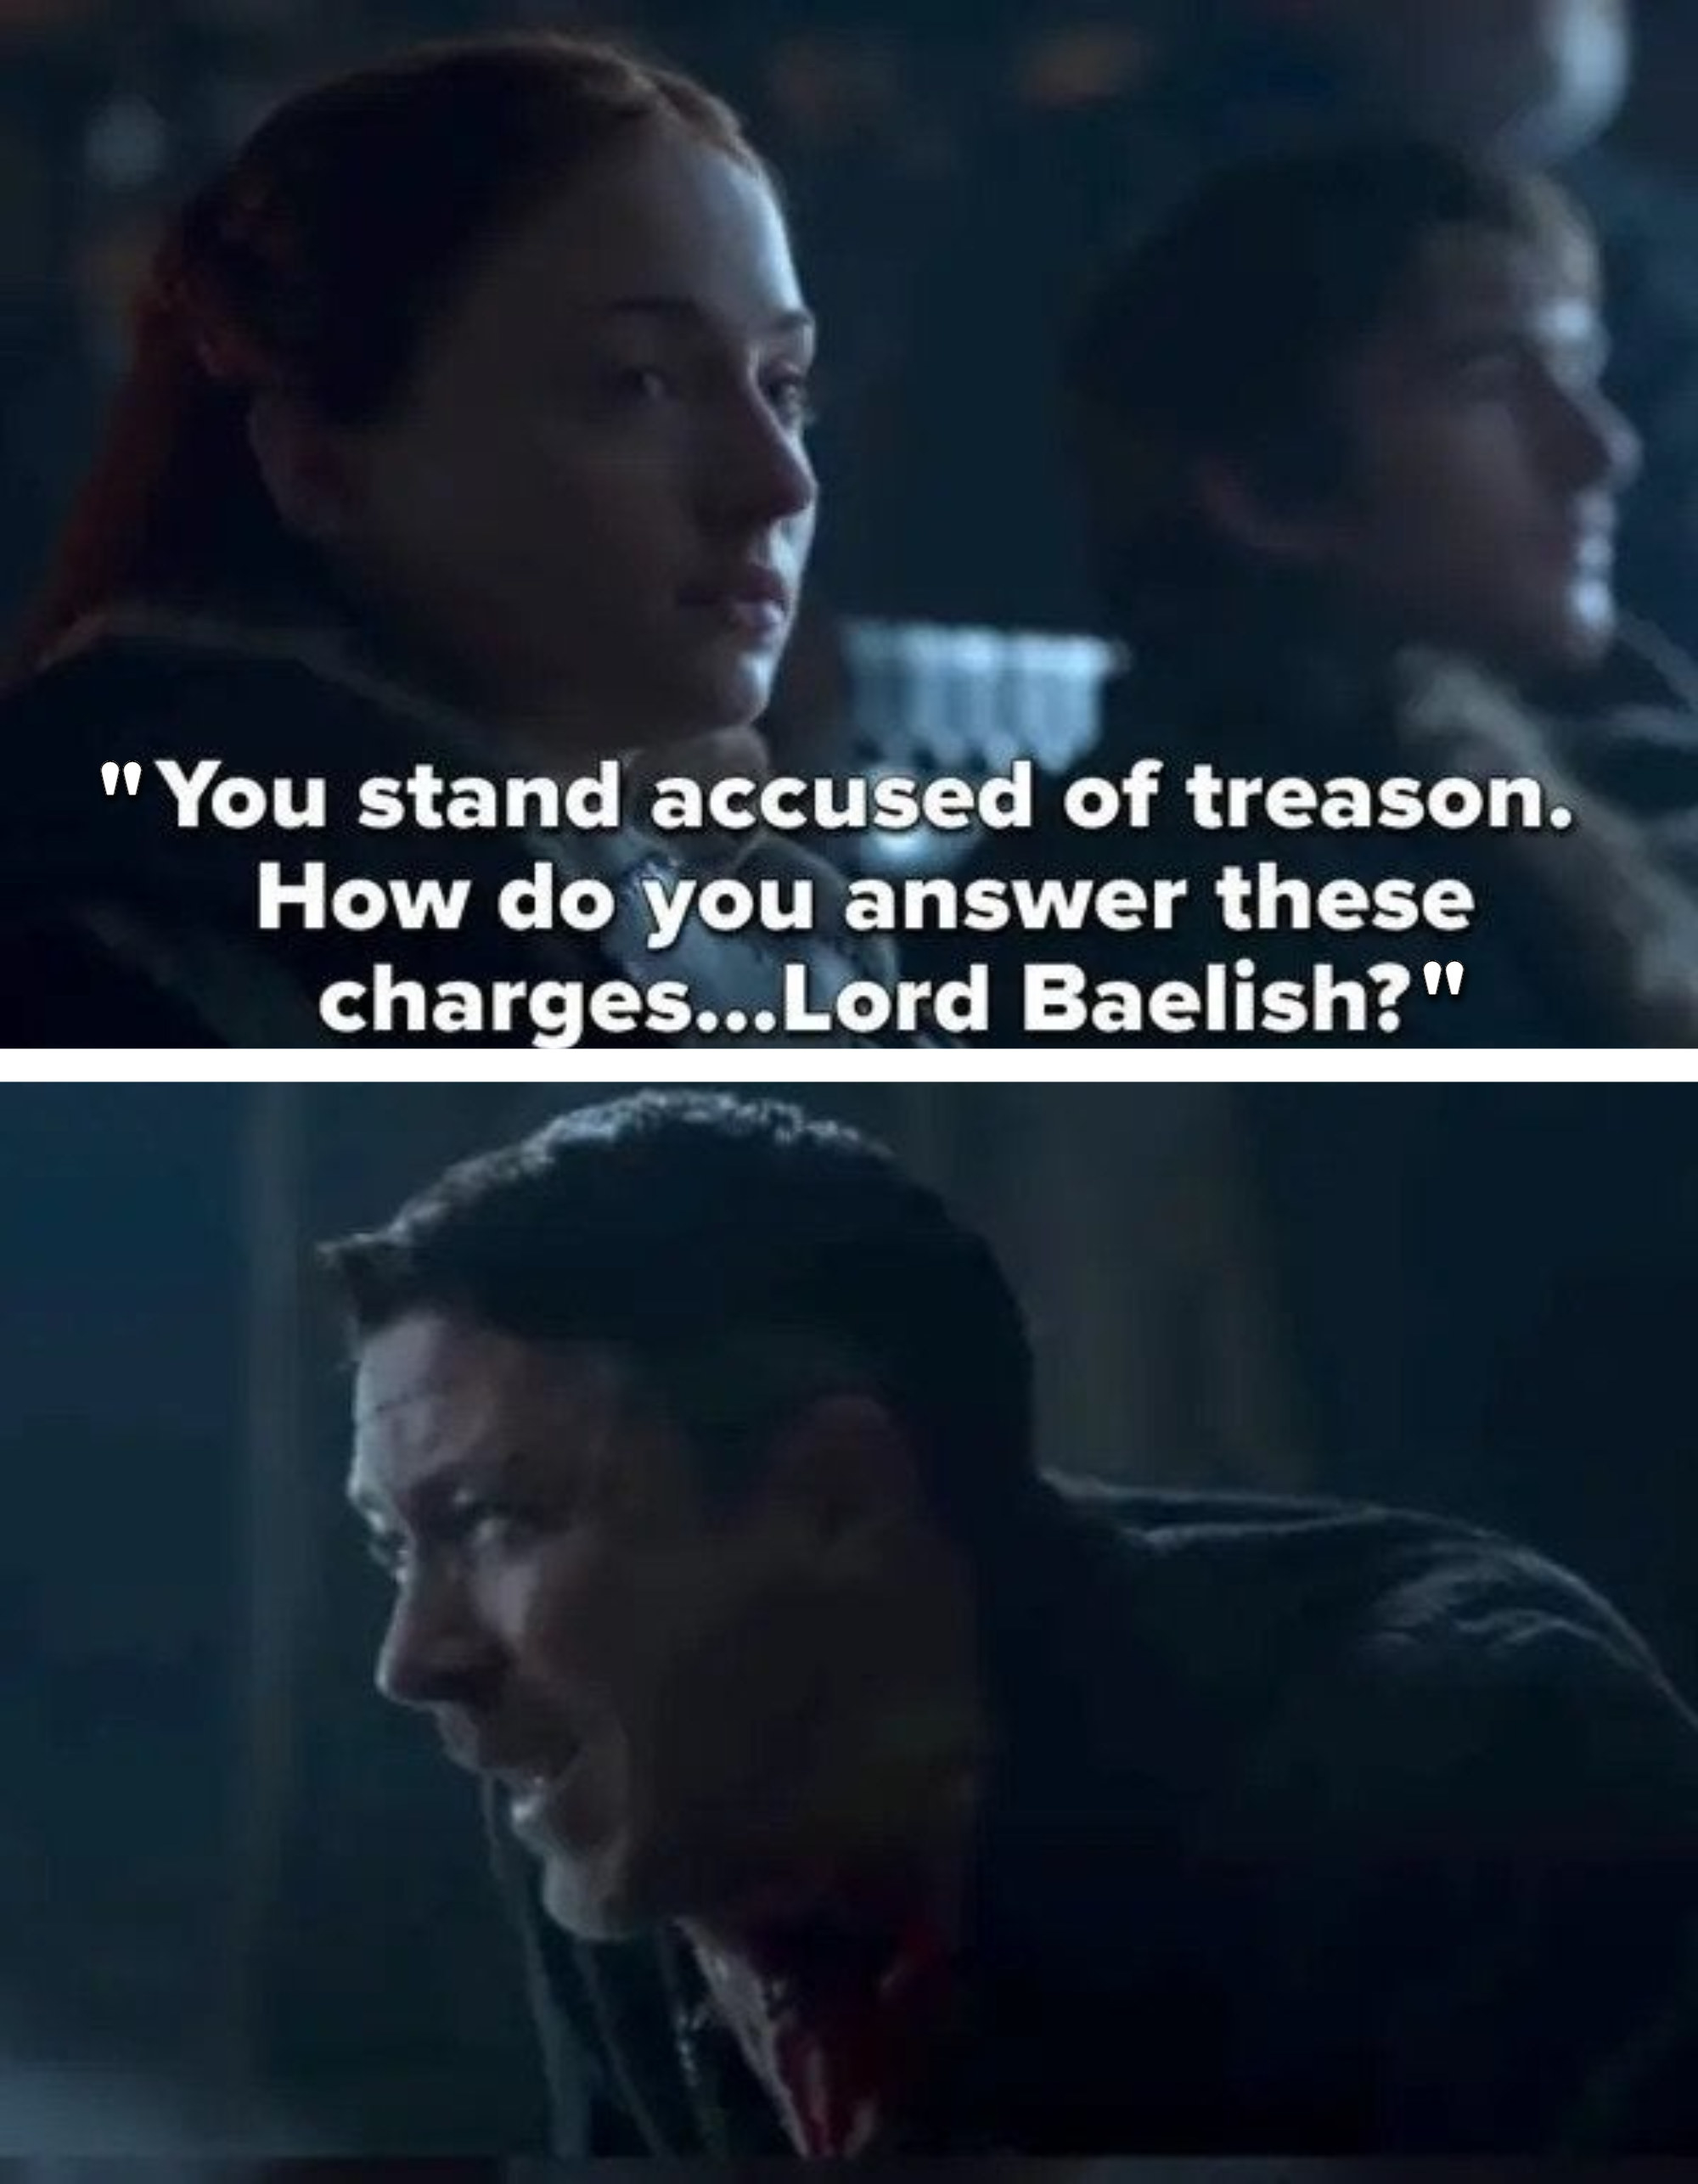 Sansa says &quot;You stand accused of treason; how do you answer these charges...Lord Baelish?&quot; then Arya slits his throat